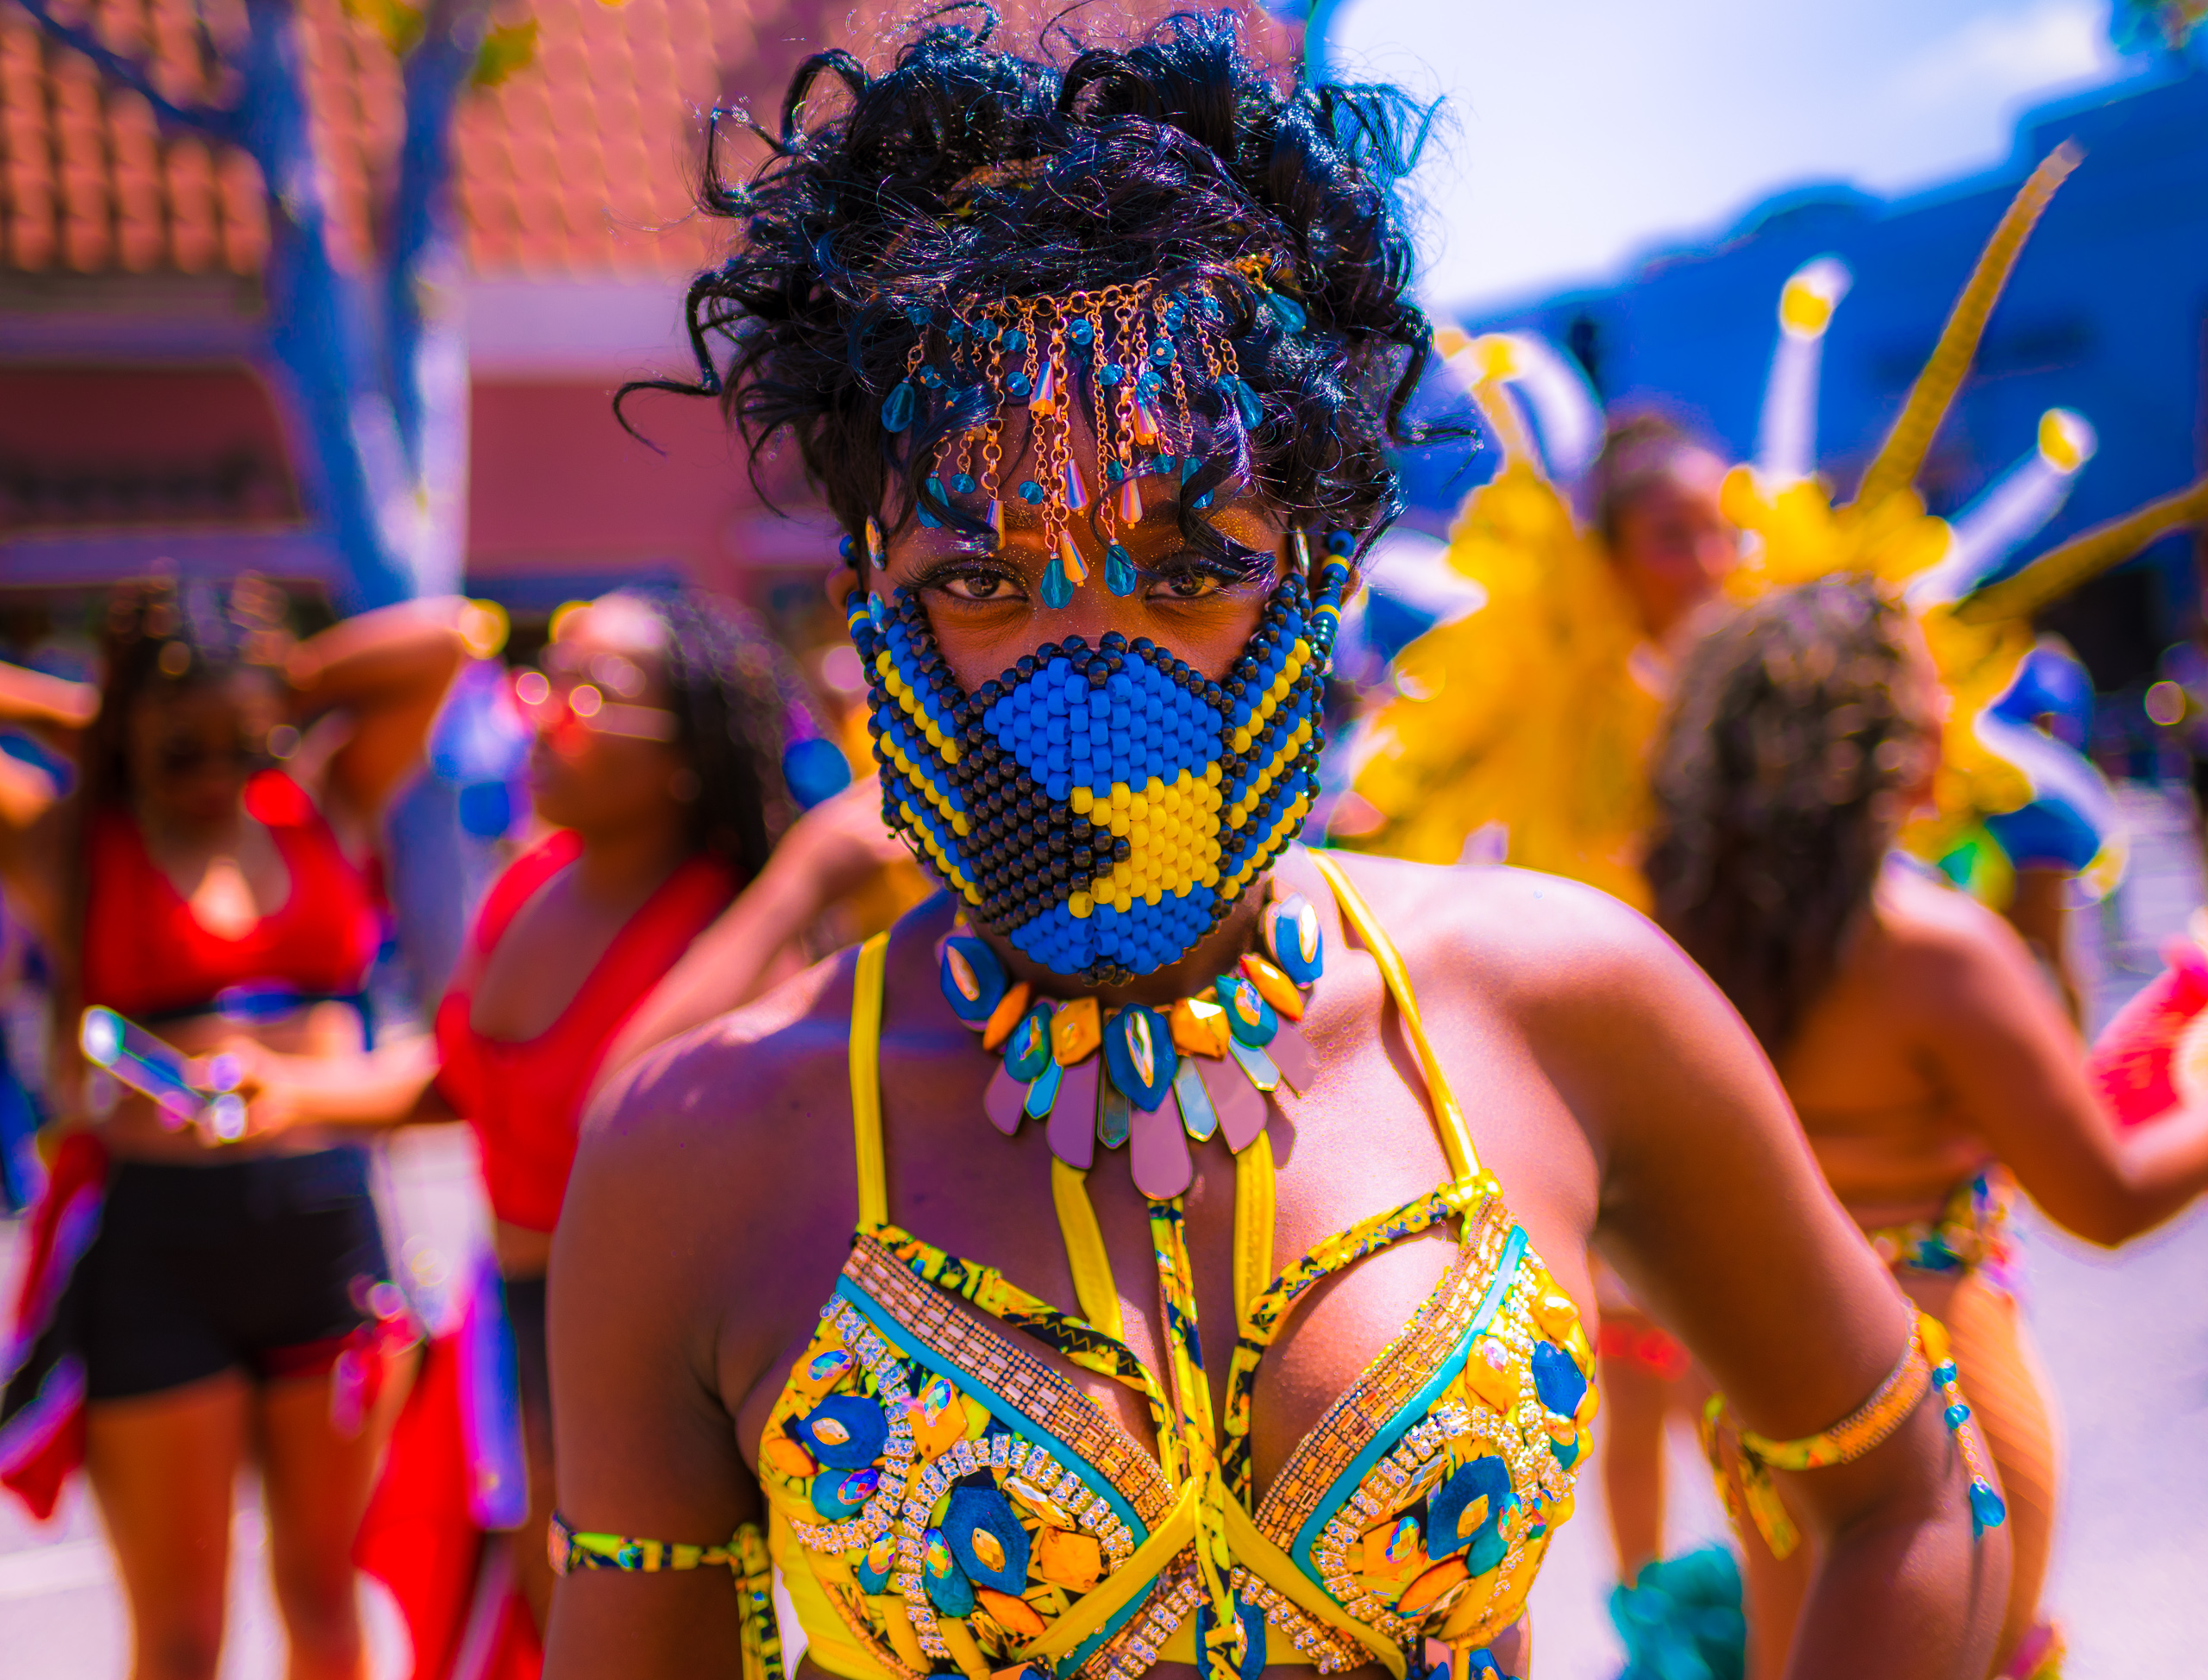 a sun-drenched dancer in a vibrant costume and a Bahamas-flag mask